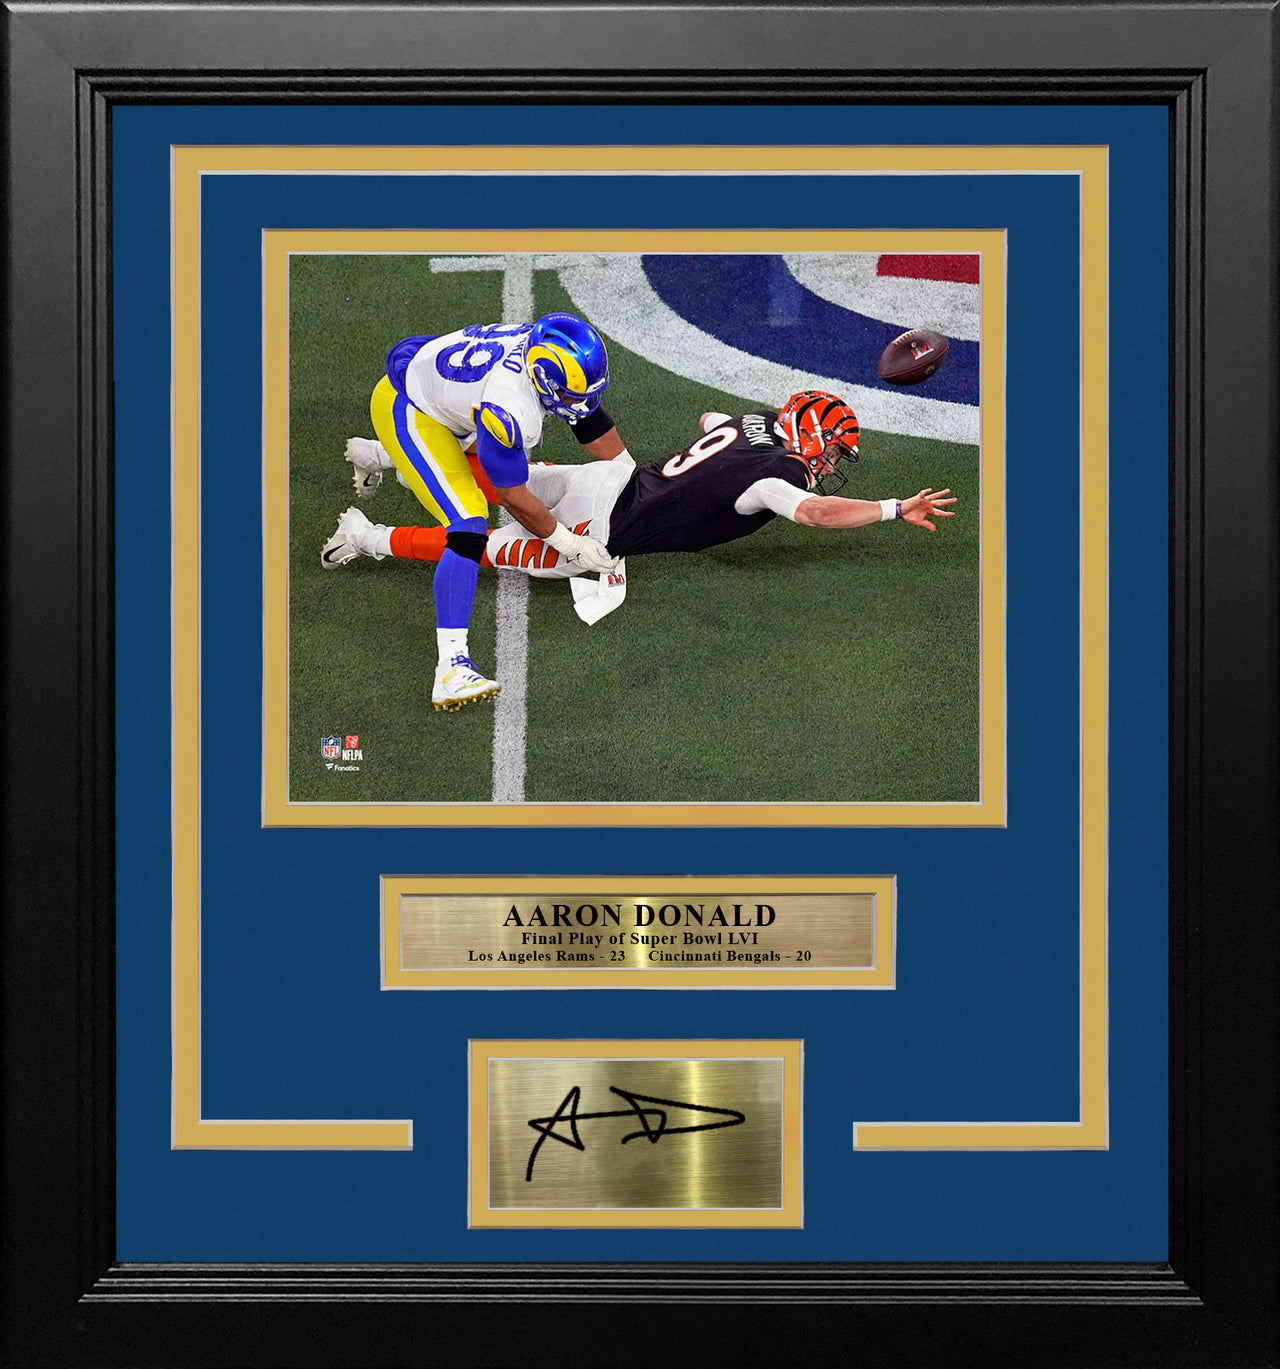 Aaron Donald Super Bowl LVI Final Play Los Angeles Rams 8x10 Framed Photo with Engraved Autograph - Dynasty Sports & Framing 